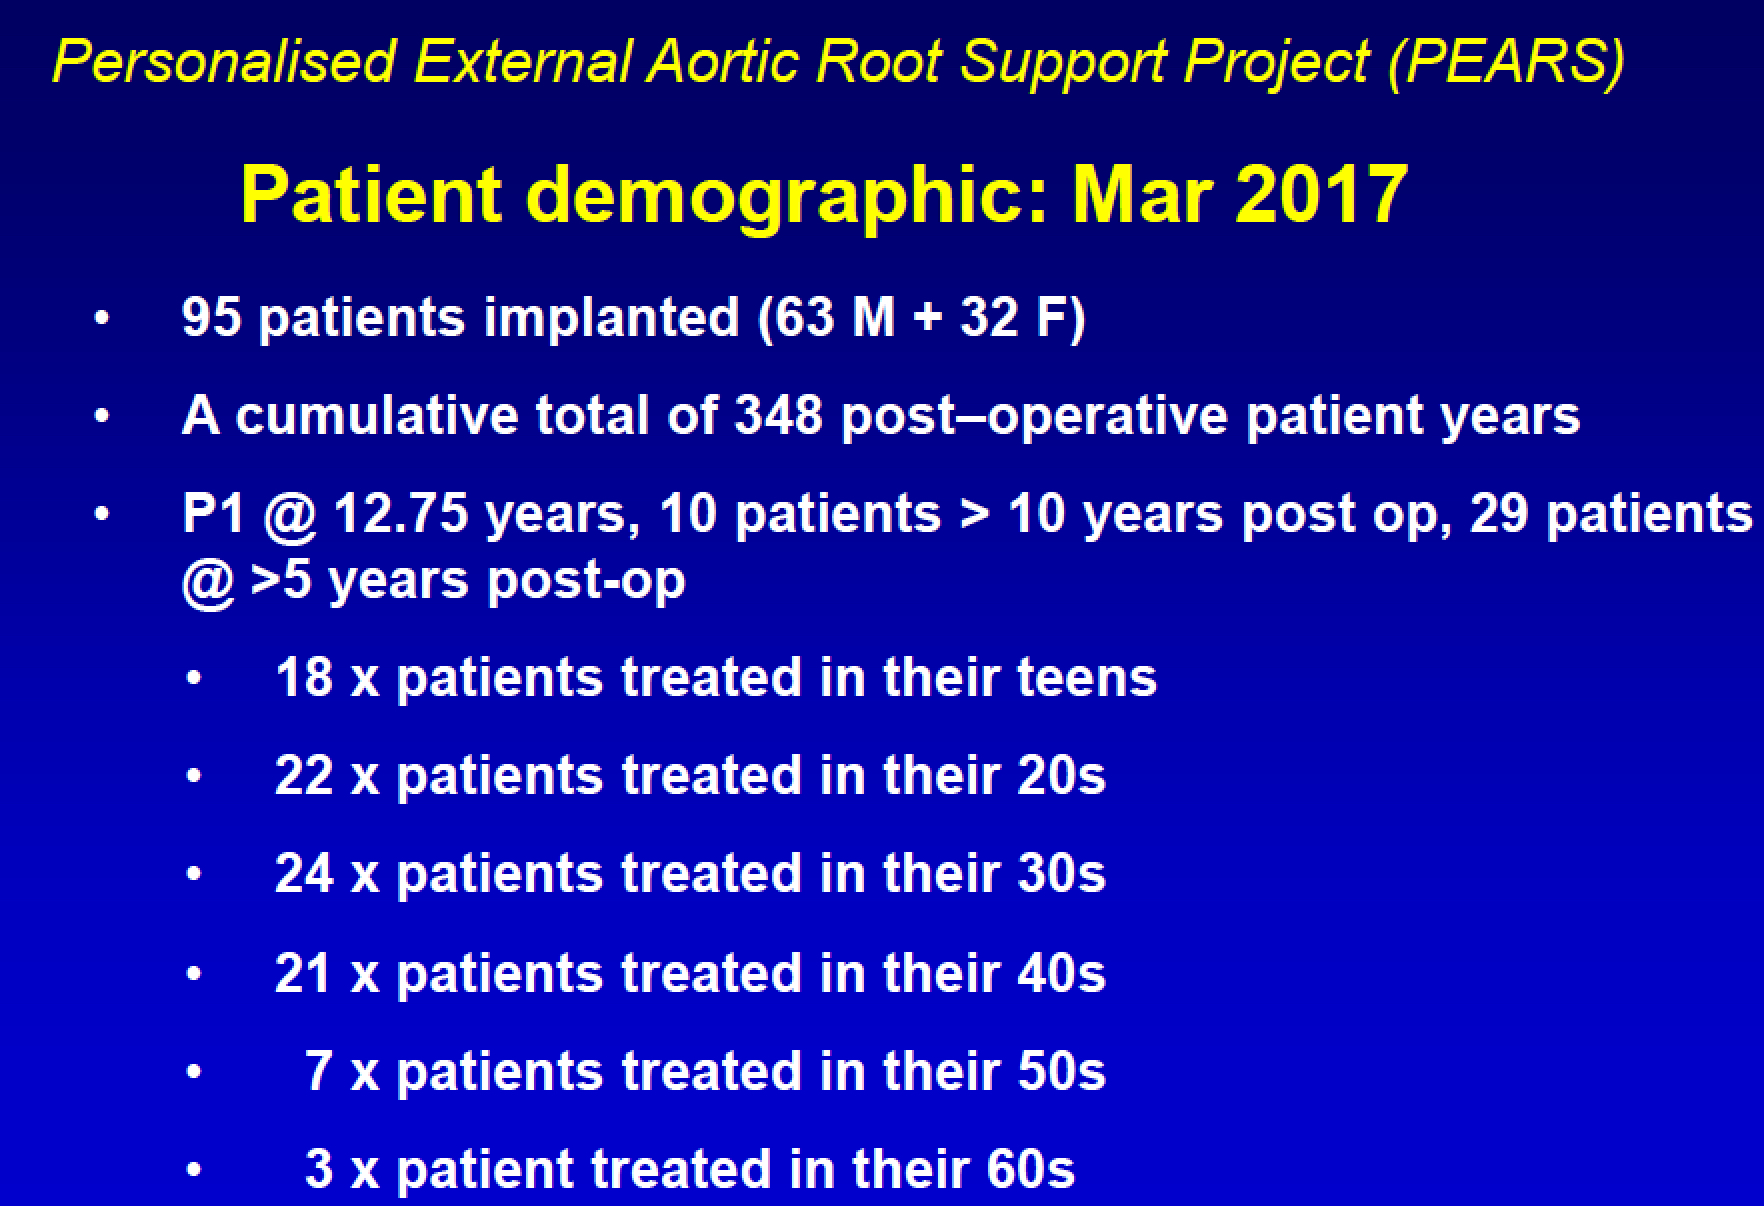 Patients treated with the PEARS Procedure as of March 2017